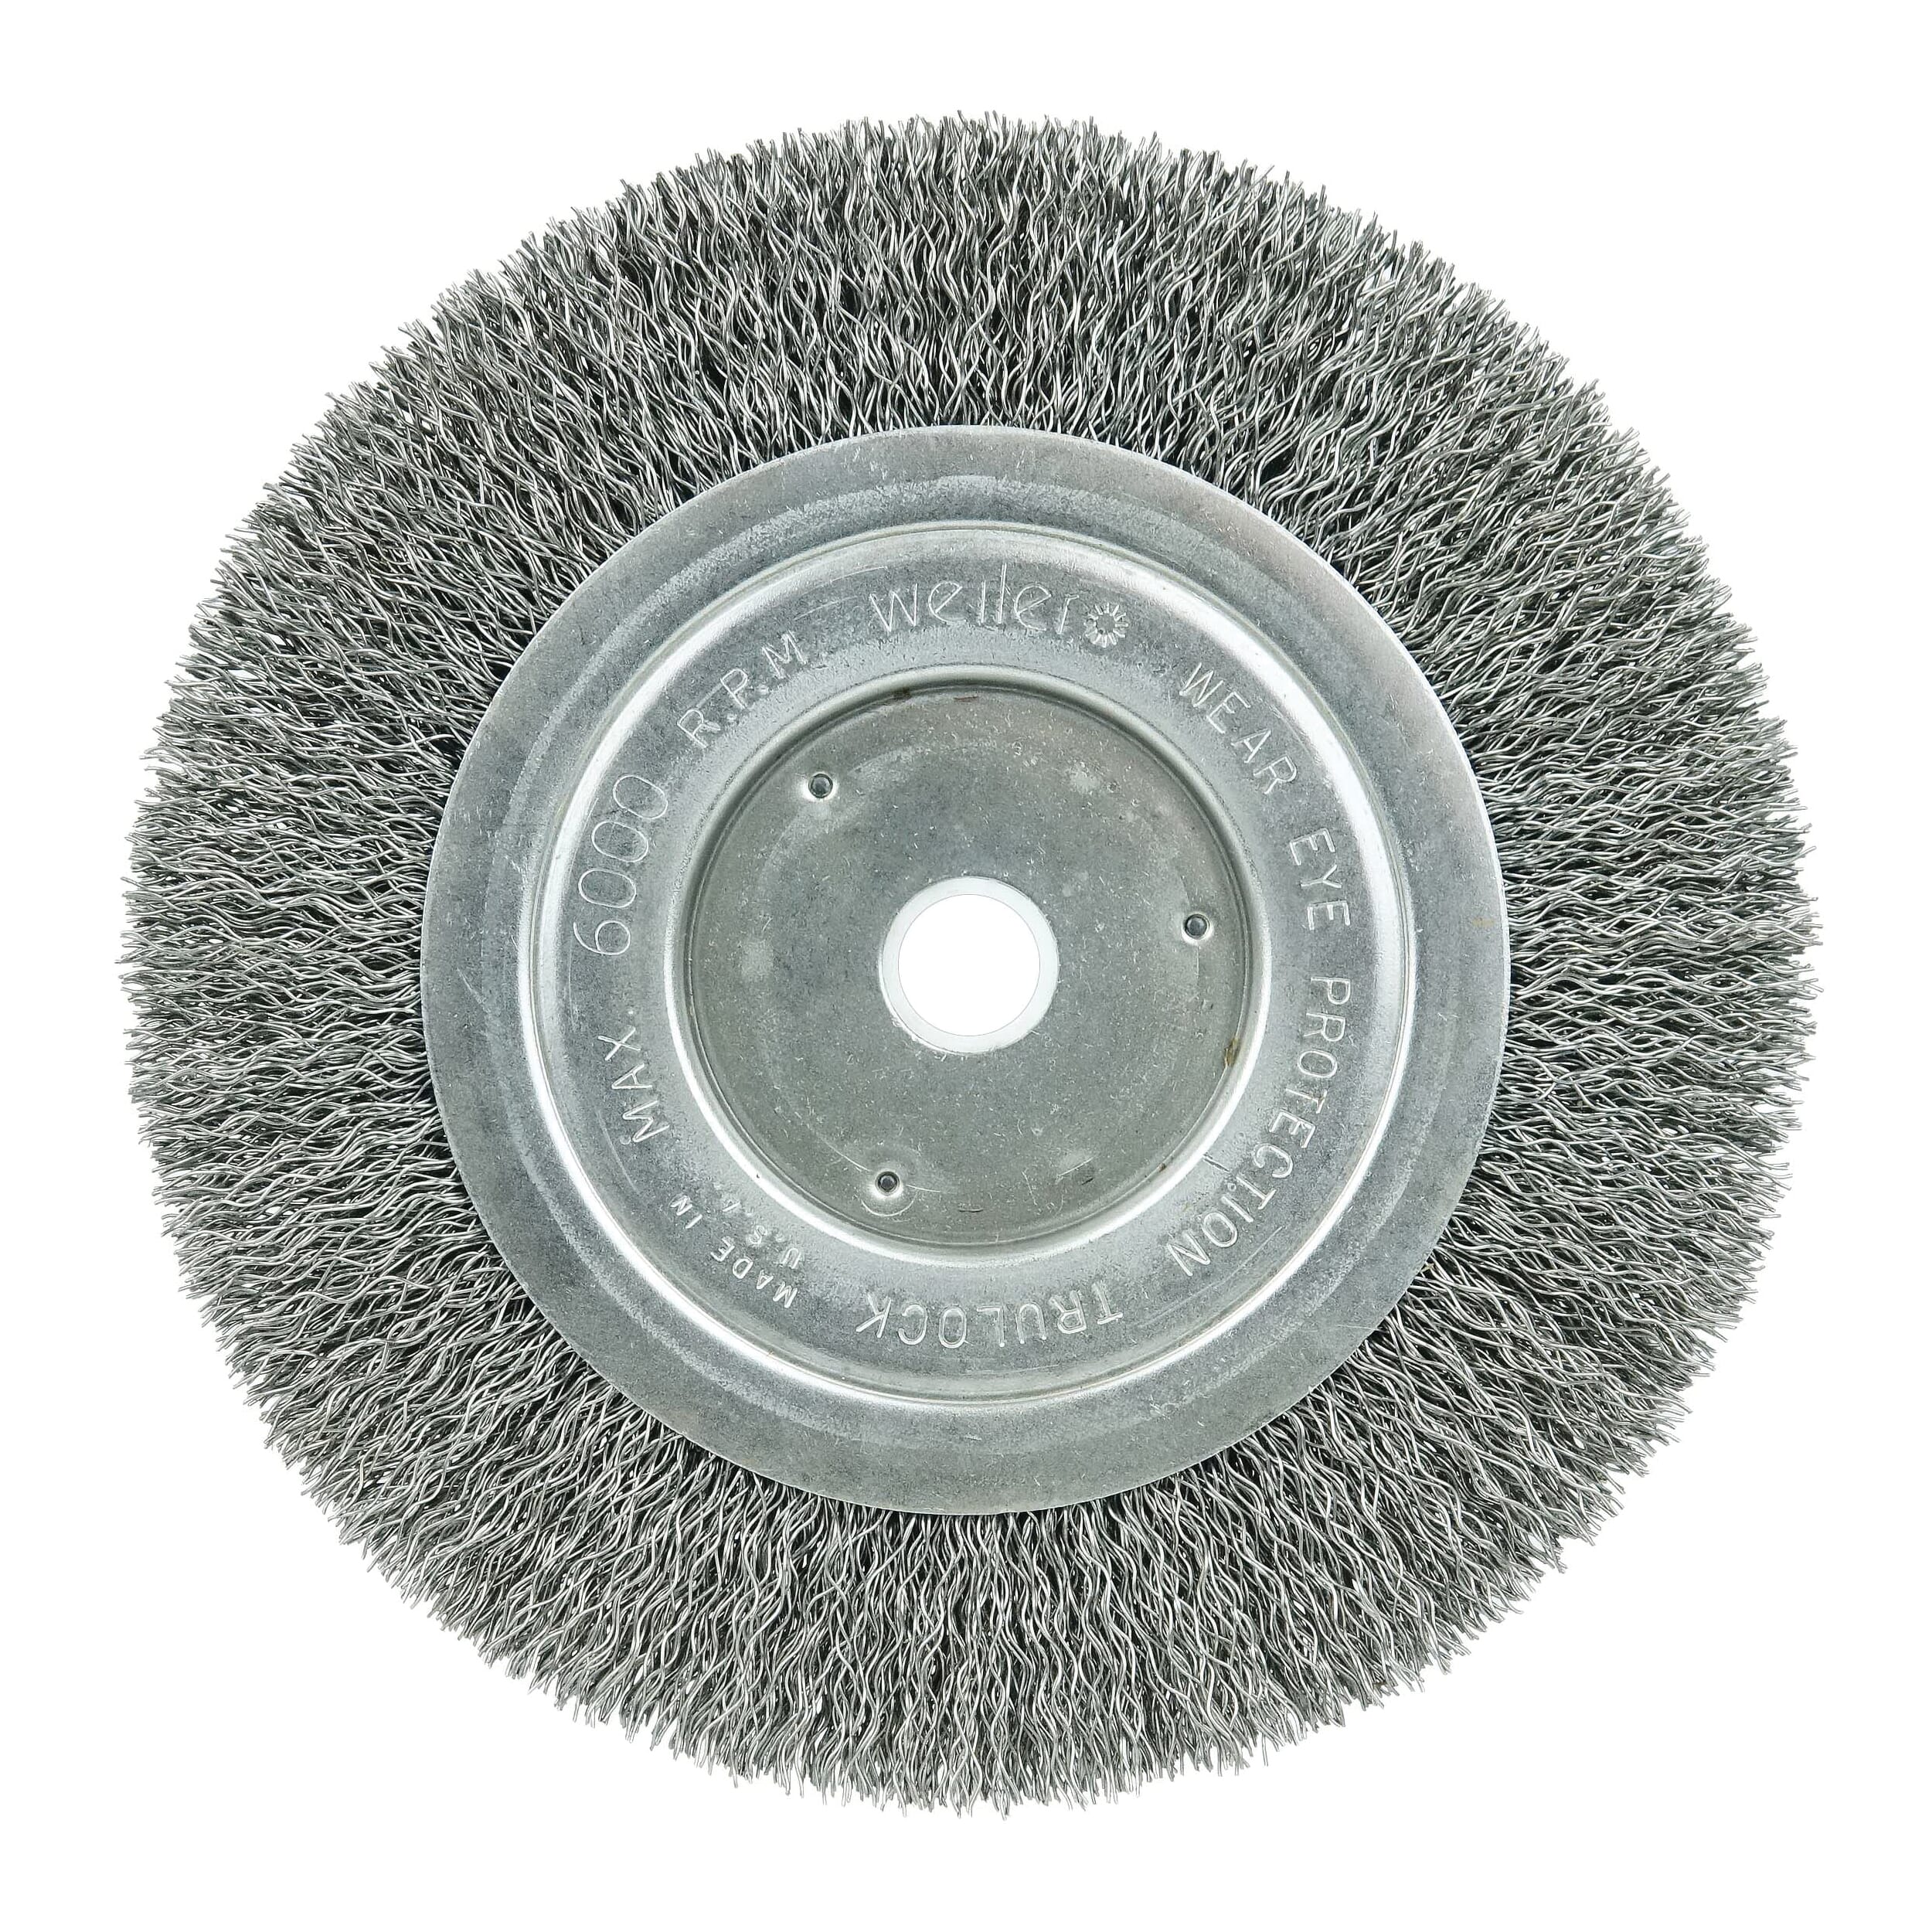 Weiler® 01115 Narrow Face Wheel Brush, 6 in Dia Brush, 1/2 in W Face, 0.0104 in Dia Crimped Filament/Wire, 1/2 to 5/8 in Arbor Hole